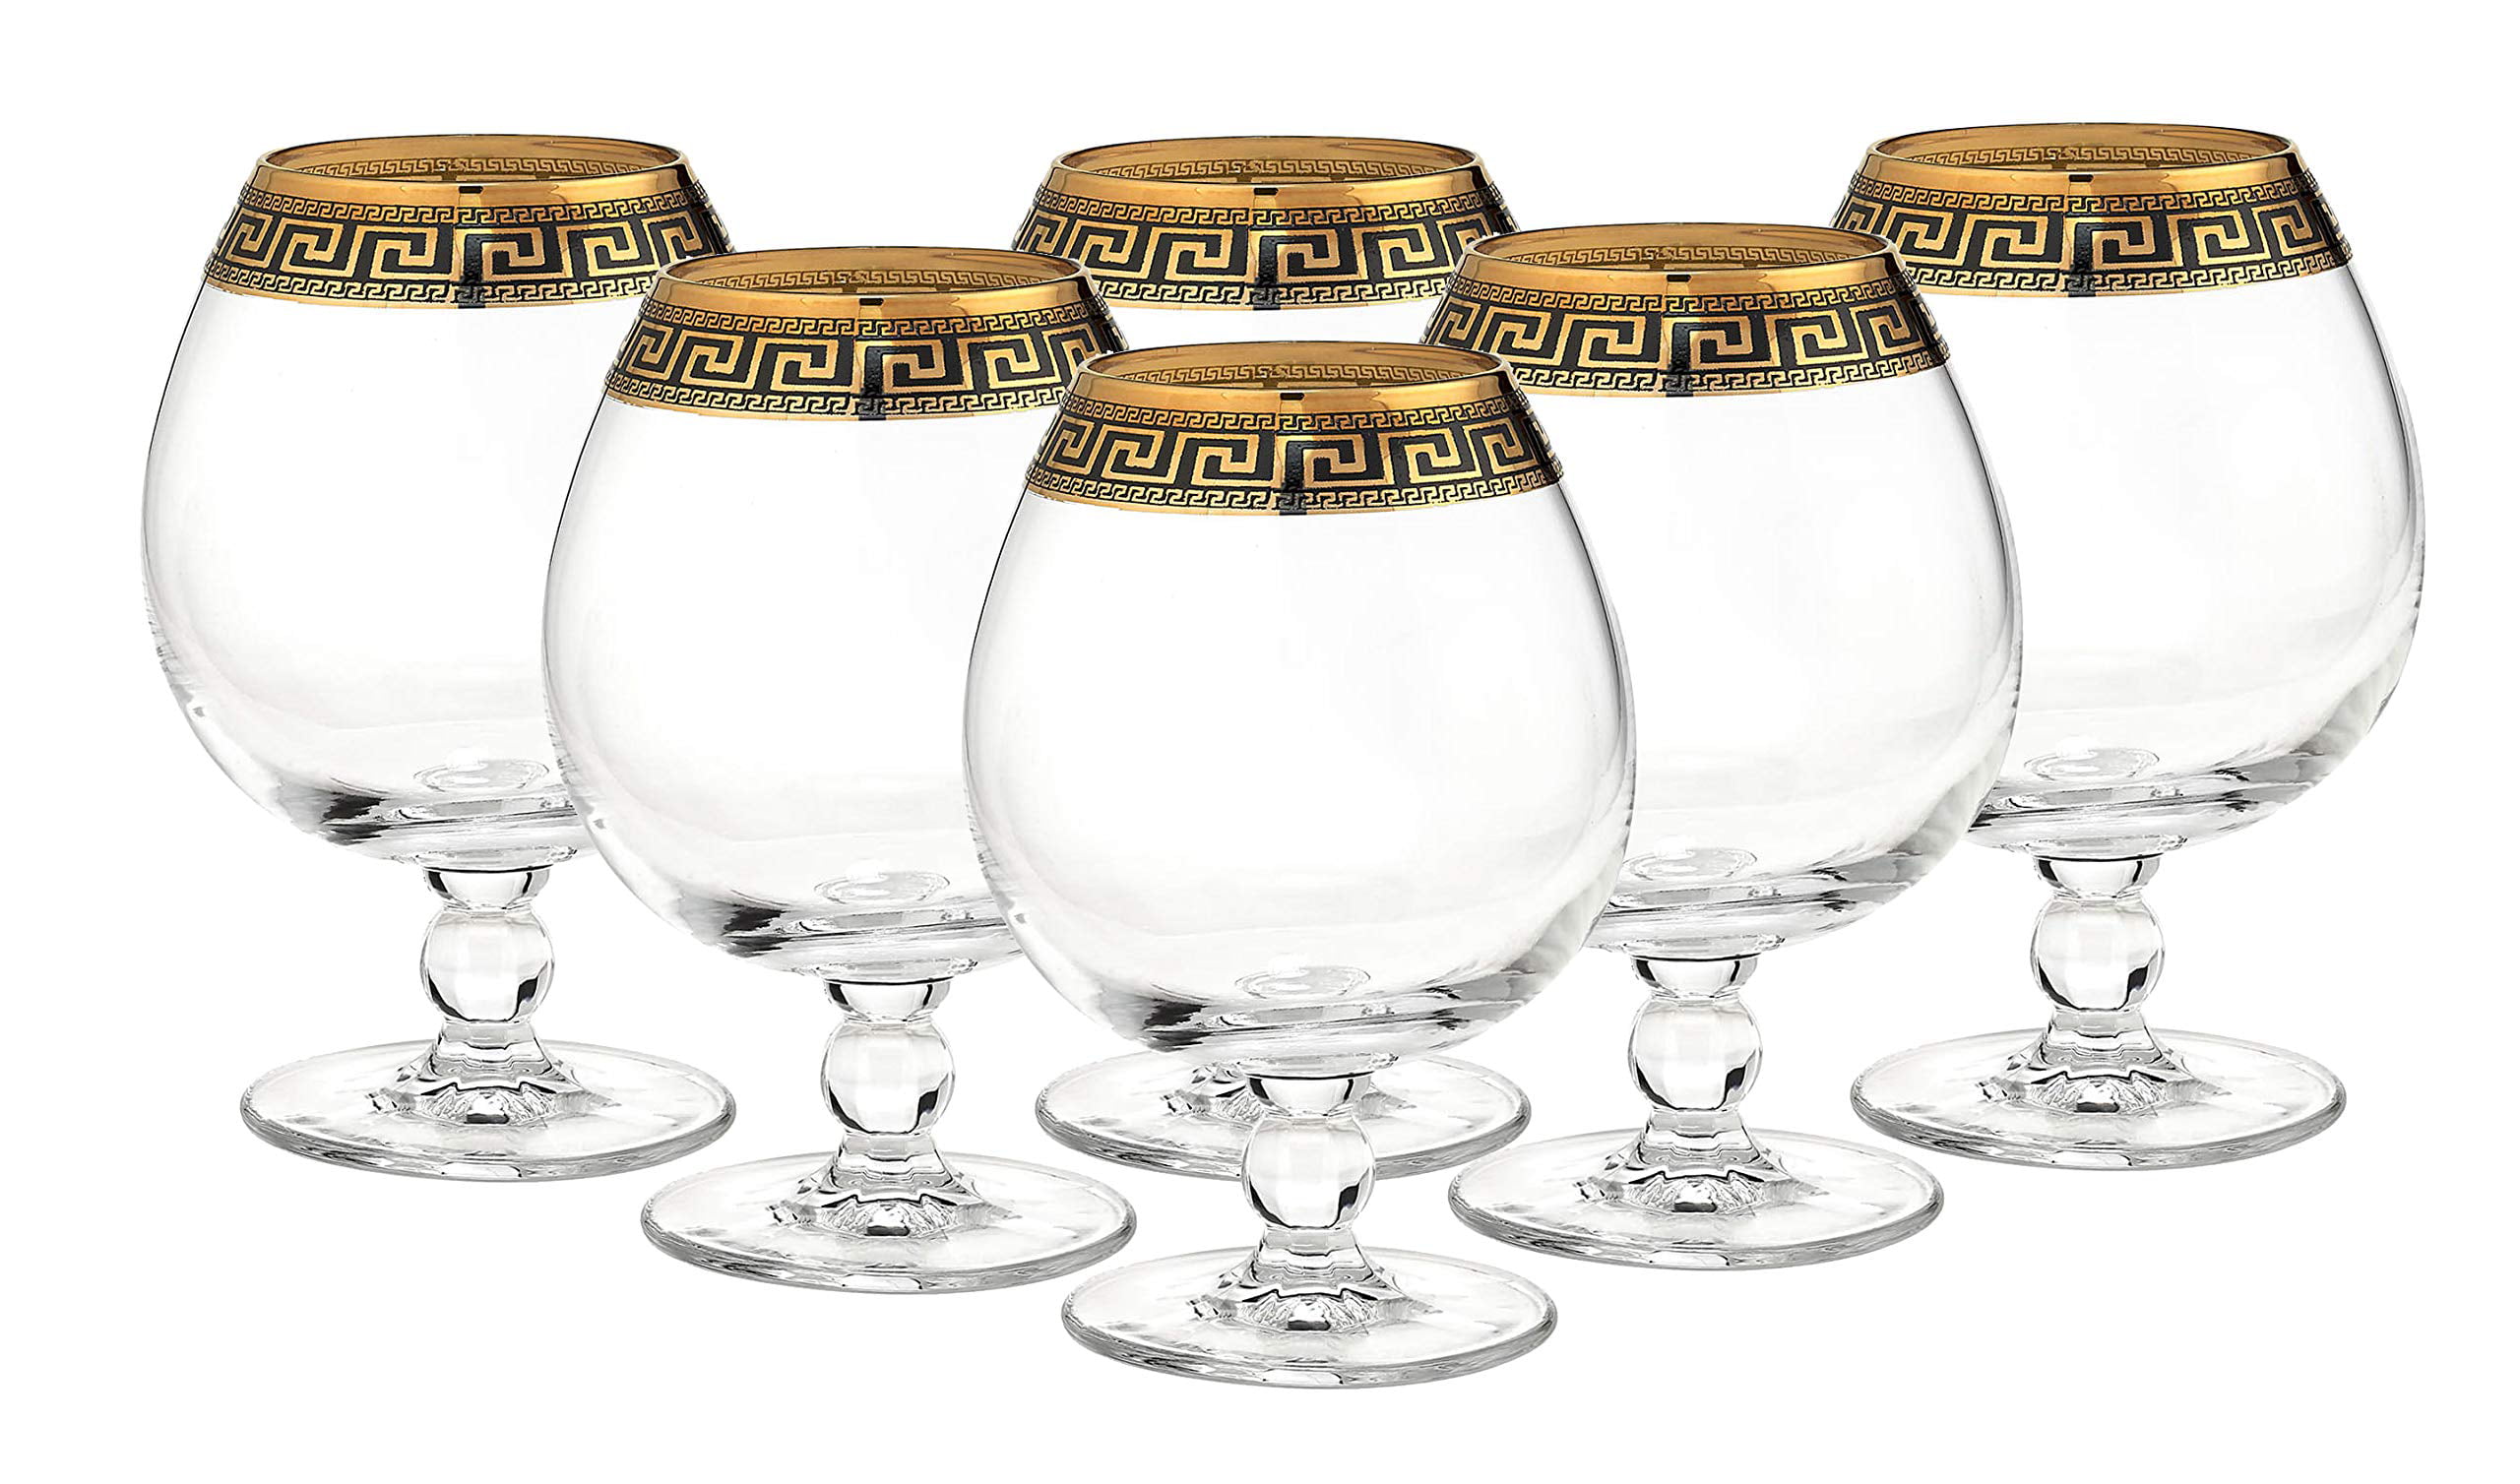 Gold and Black Greek Key Ornament Hand Made in Italy 17 oz Cristalleria Italian Decor Crystal Cognac Brandy Snifter Goblet SET OF 6 Glasses 